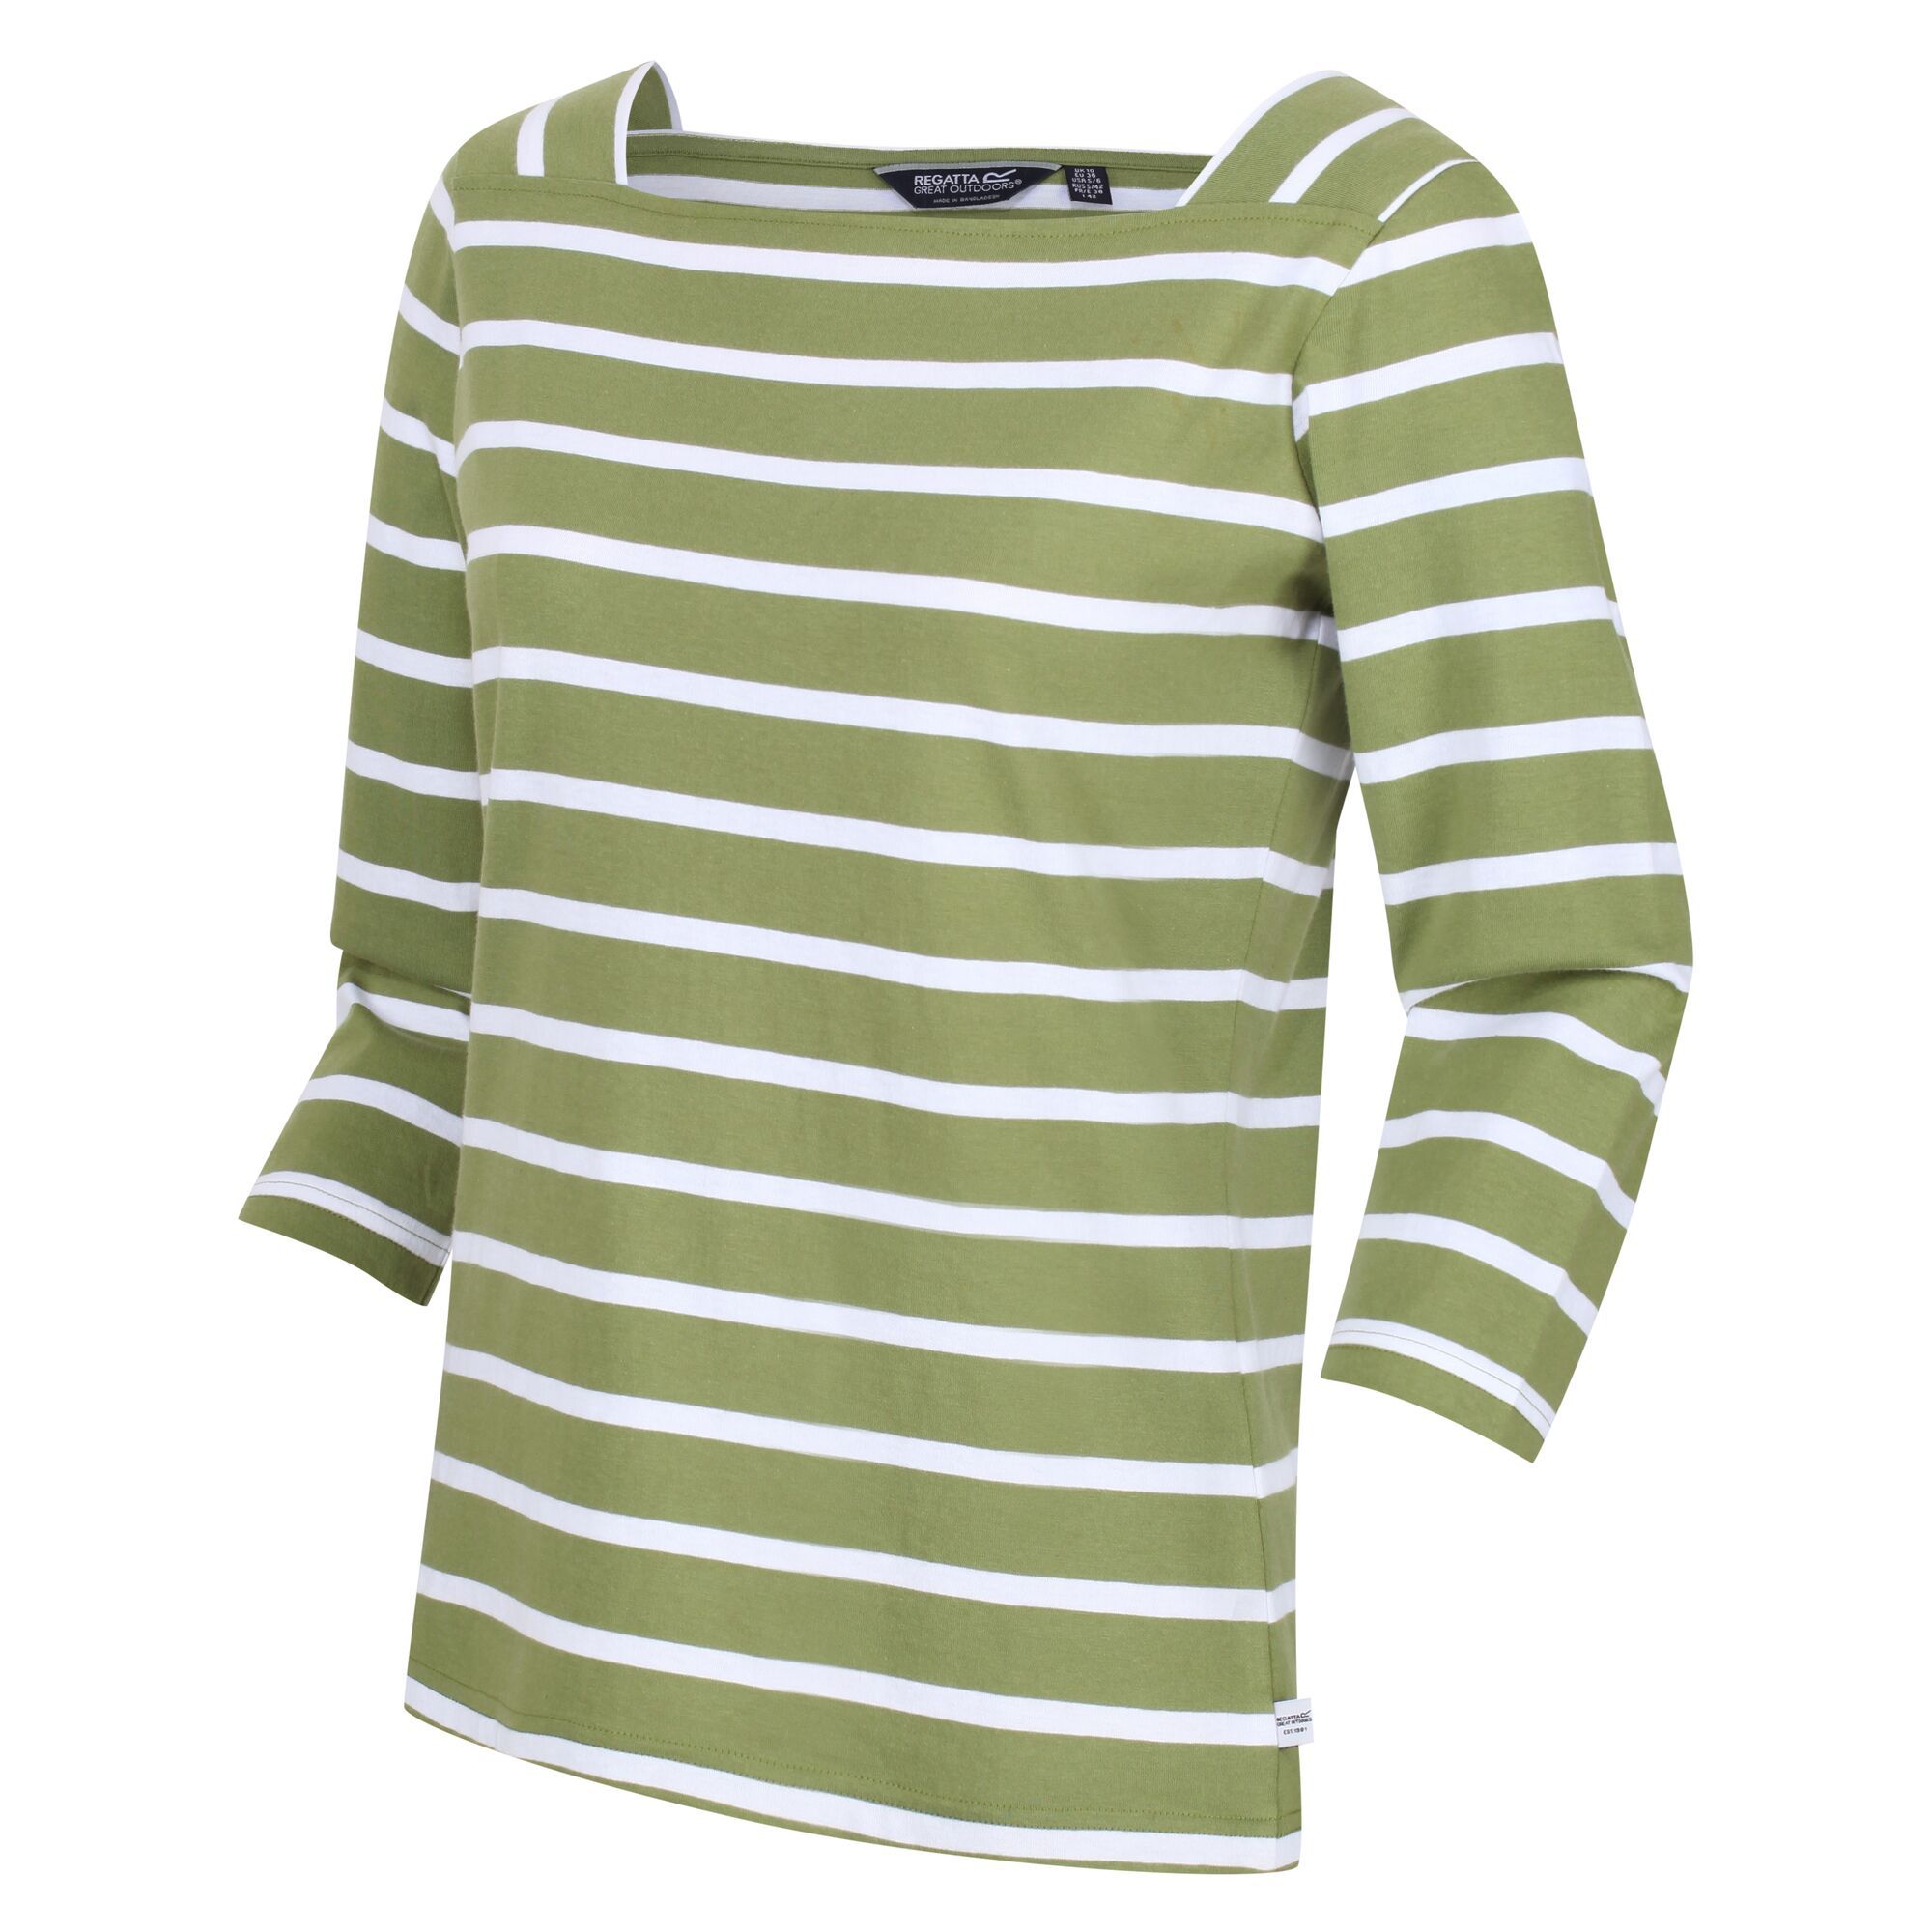 100% Cotton. Fabric: Coolweave. Design: Stripe. Sleeve-Type: 3/4 Sleeve. Neckline: Square Neck. Branded Tab, Side Vents, Supersoft, Tearaway Label. Fabric Technology: Breathable. Sustainable Materials.